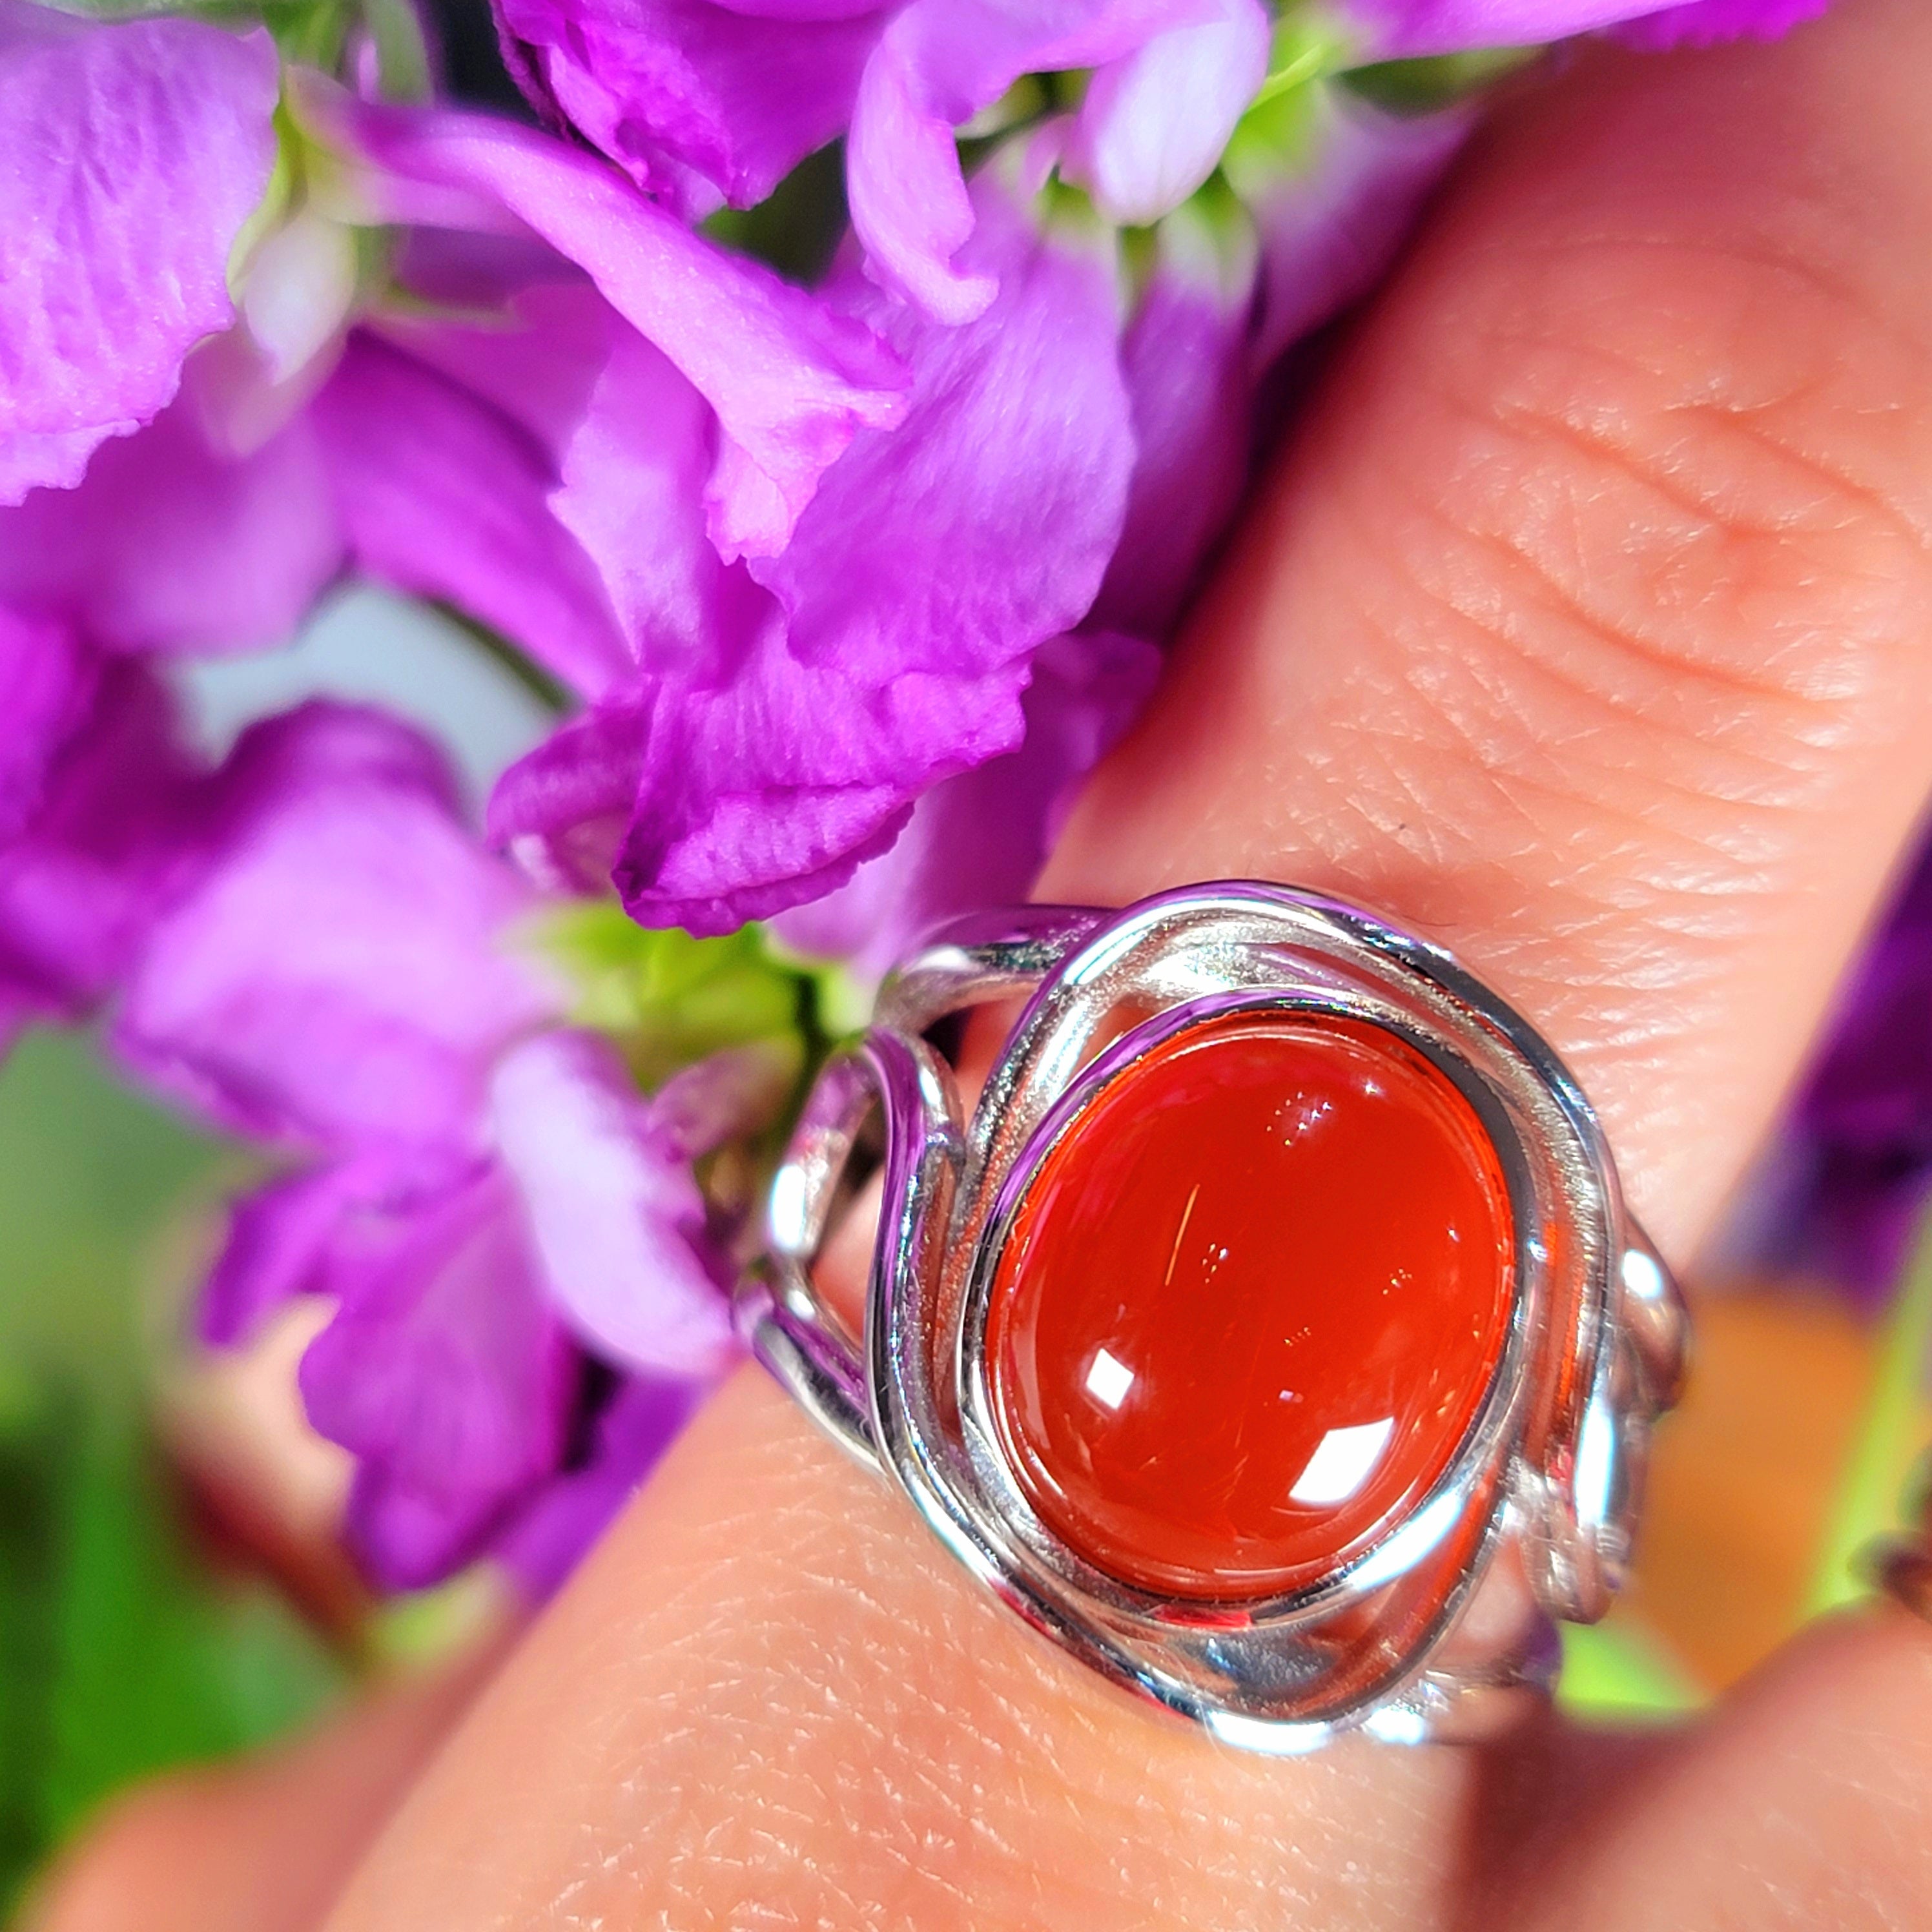 Carnelian Finger Cuff Adjustable Ring .925 Silver for Energy, Passion and Personal Power